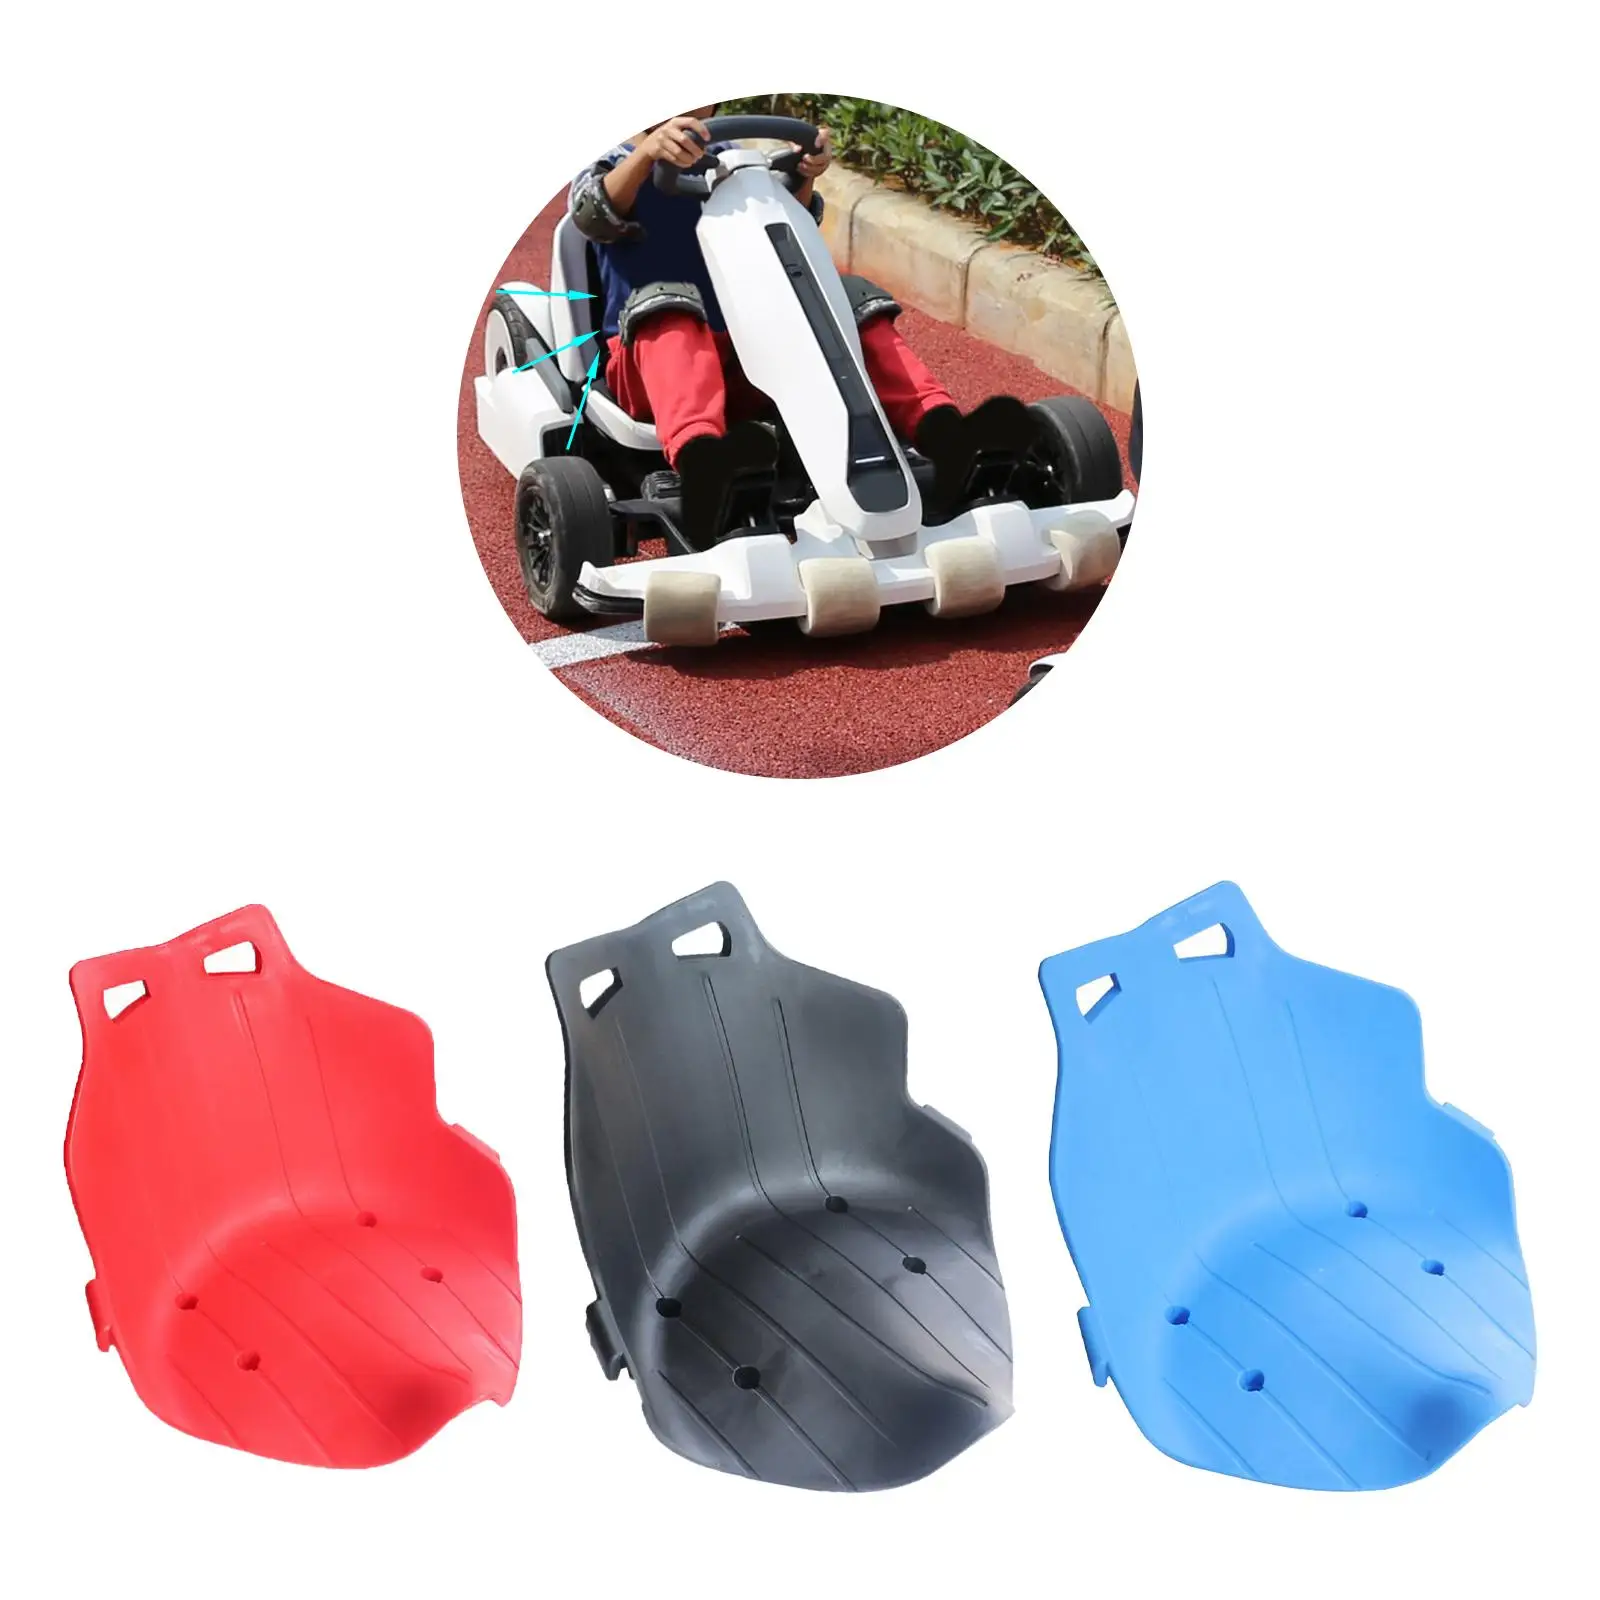 Kids Seat Attachment Go Karts Seat Saddle DIY for Racing Balancing Vehicle Durable Drift Cart Seat Saddle Accessory